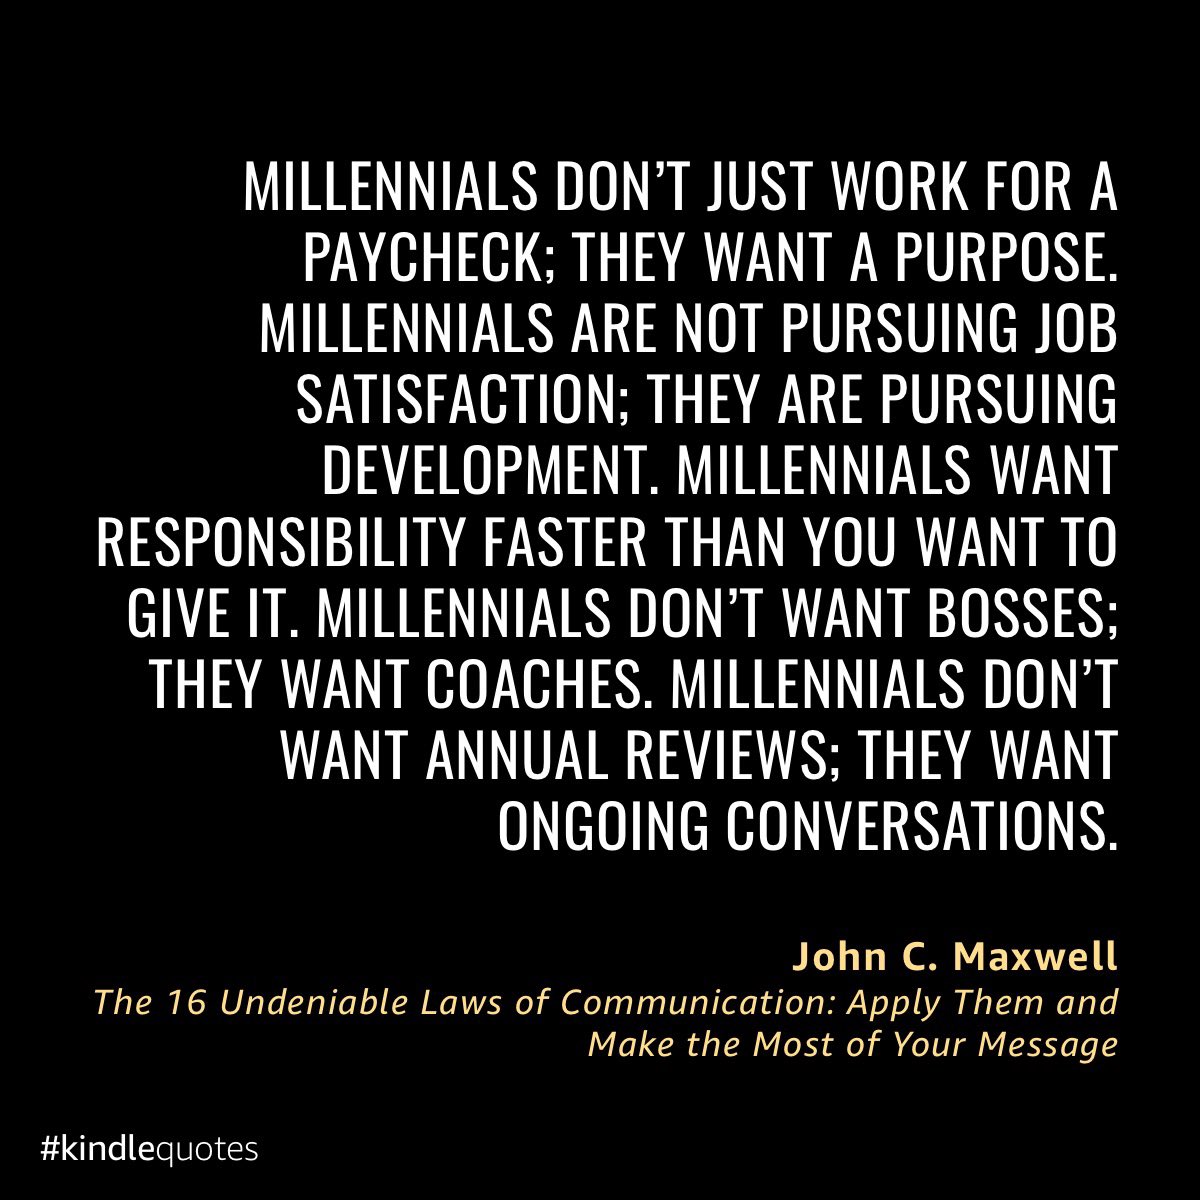 This is the culture now. If you’re not paying attention, you’re going to lose some of your best people. 

#Millennial
#PurposeDrivenWork
#MillennialMindset
#DevelopmentOverSatisfaction
#FastTrackResponsibility
#CoachingNotBossing
#OngoingConversations
#MillennialWorkEthic